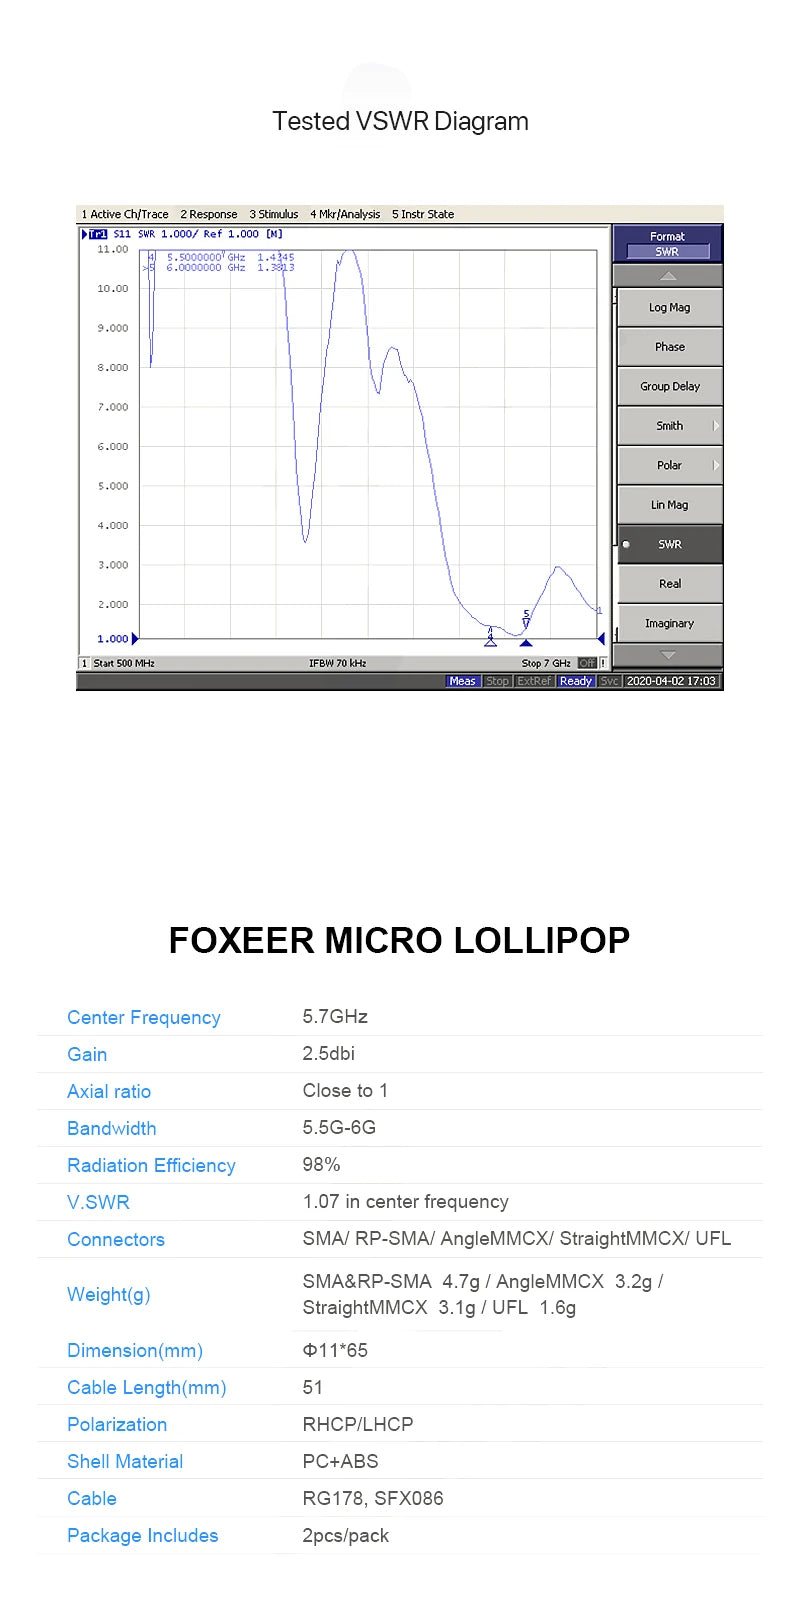 Upgraded Version Foxeer Antenna, VSWR Diagram Active ChyTrace Response Stimulus Mkr 